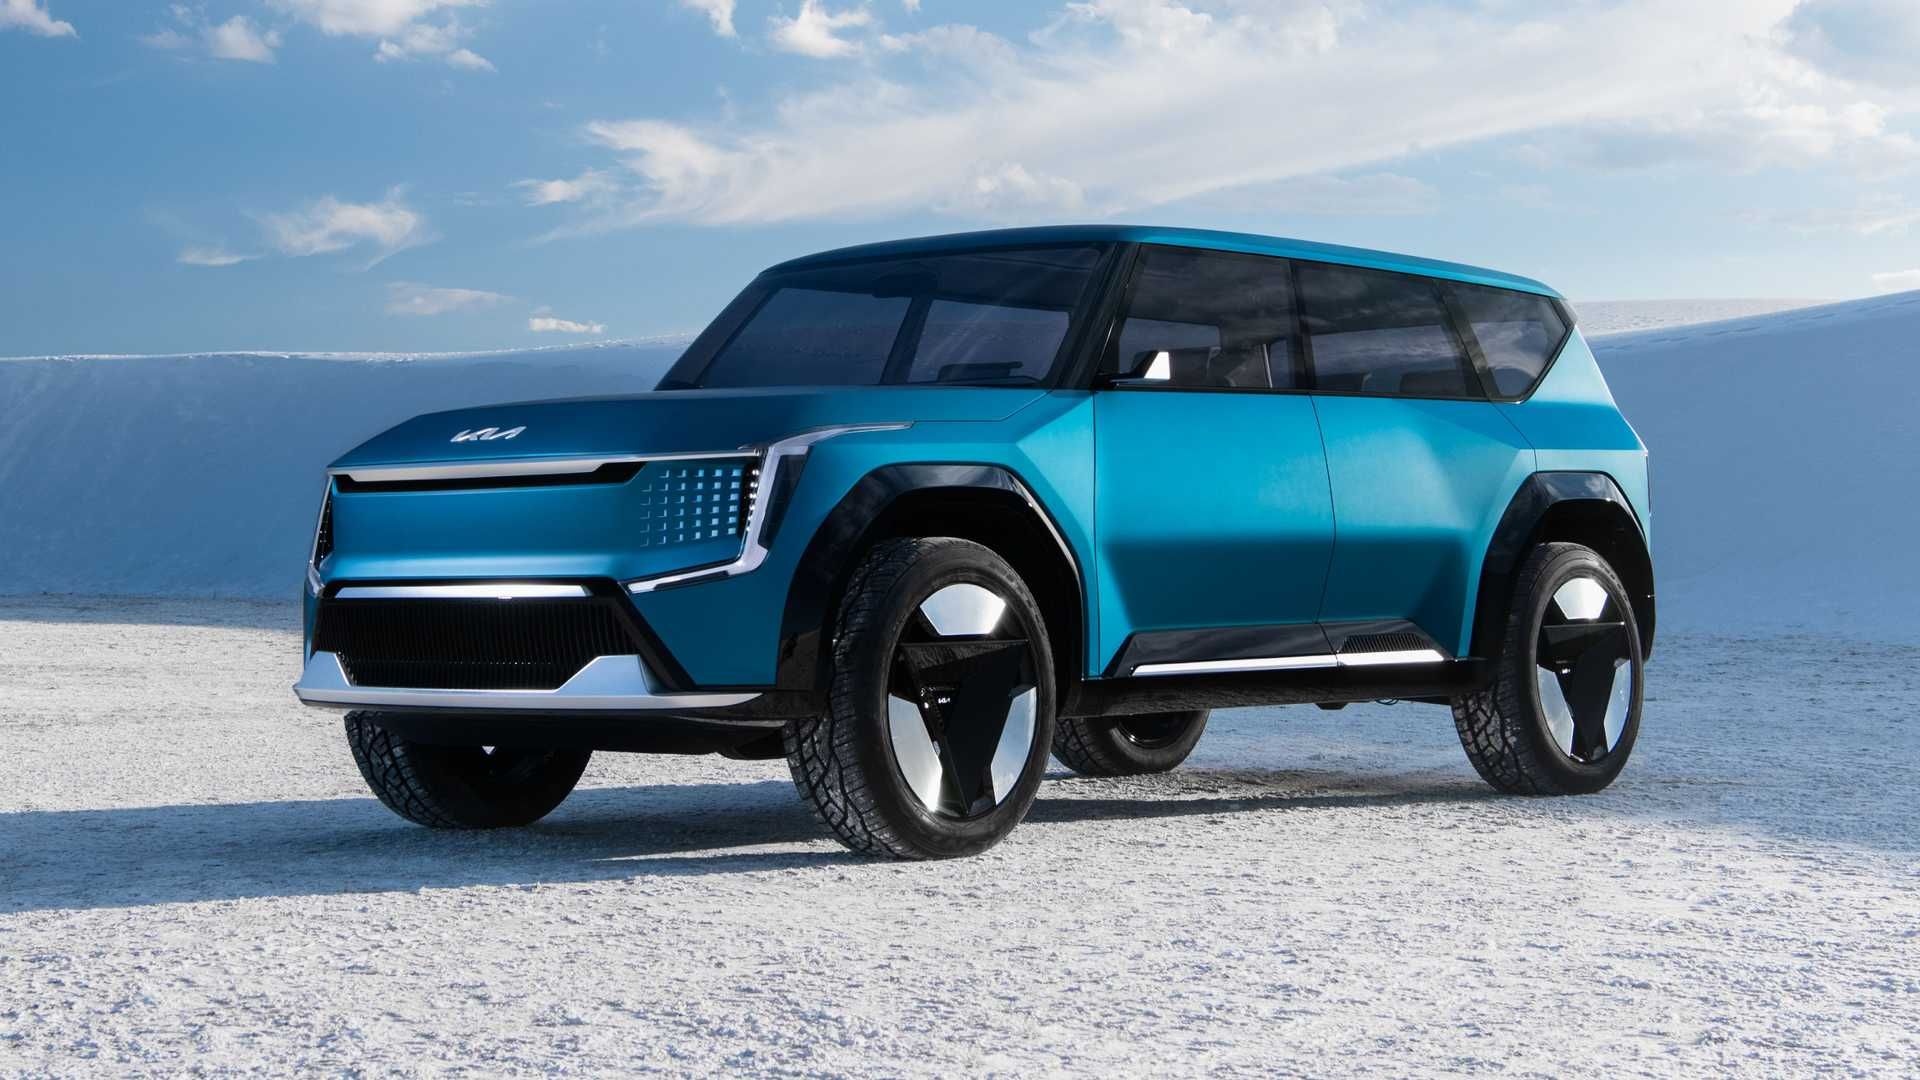 10 Coolest New Evs To Look Forward To In 2023